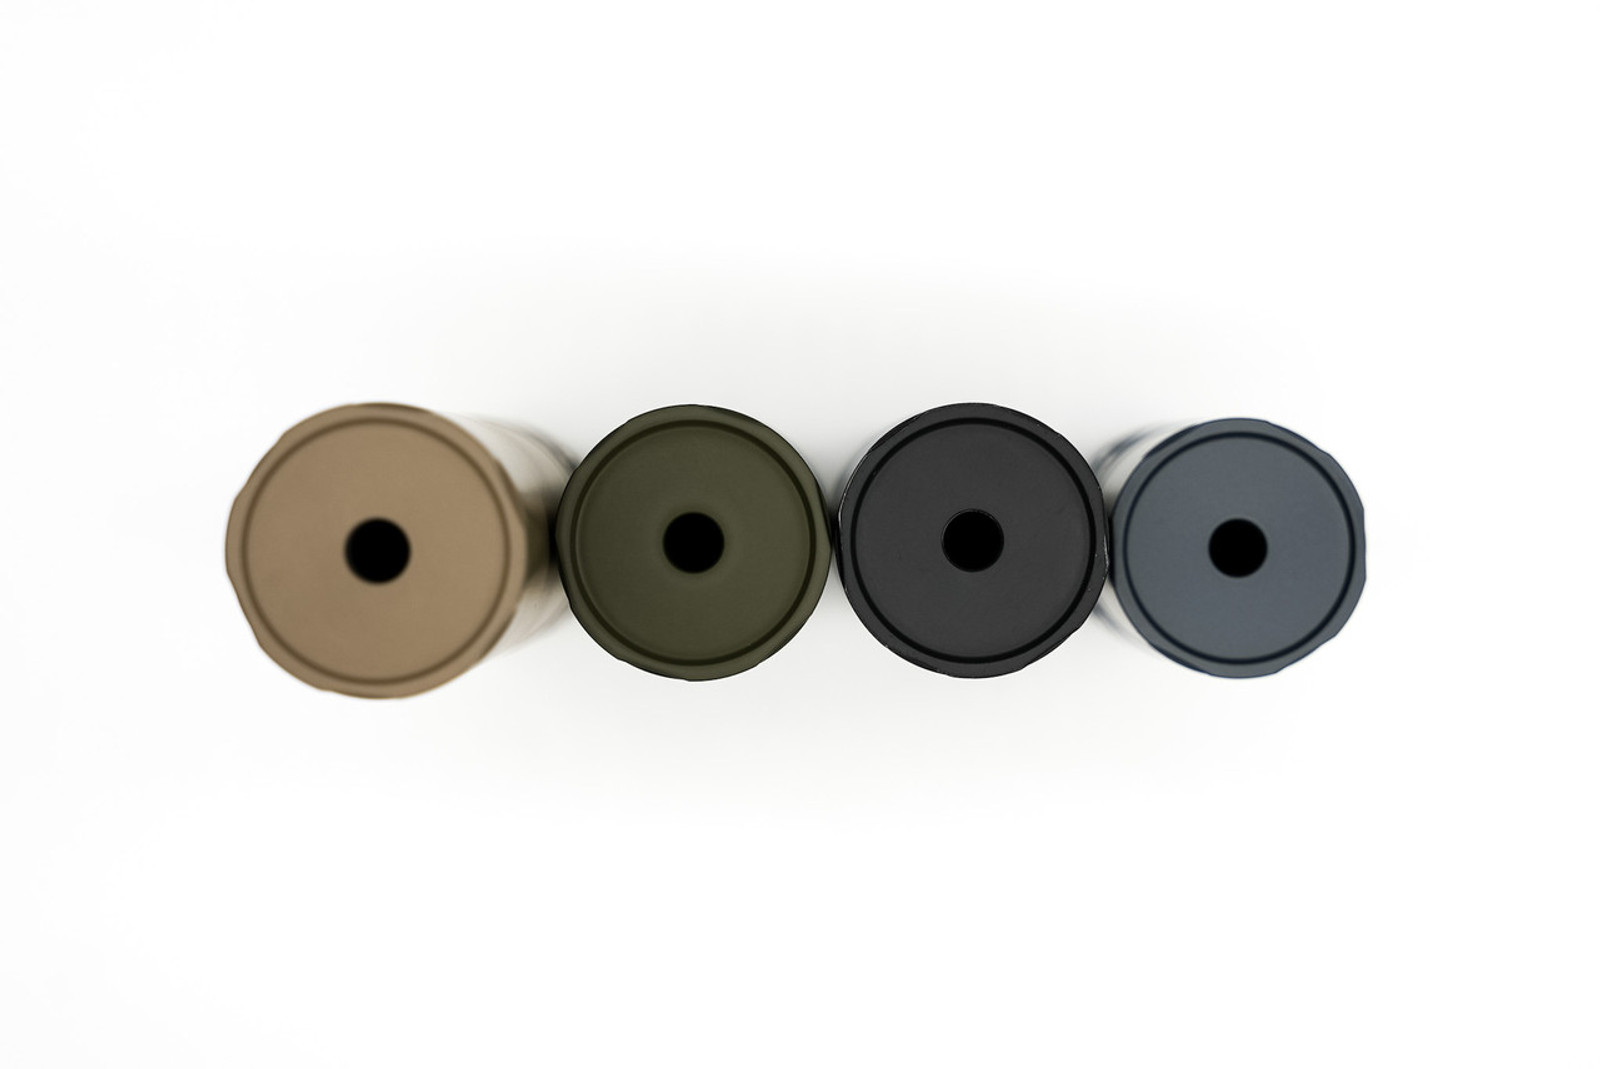 THEOREM SERIES SHOWCASING THE COLORS GRAY, OD GREEN AND FDE ALL FROM THE TOP VIEW